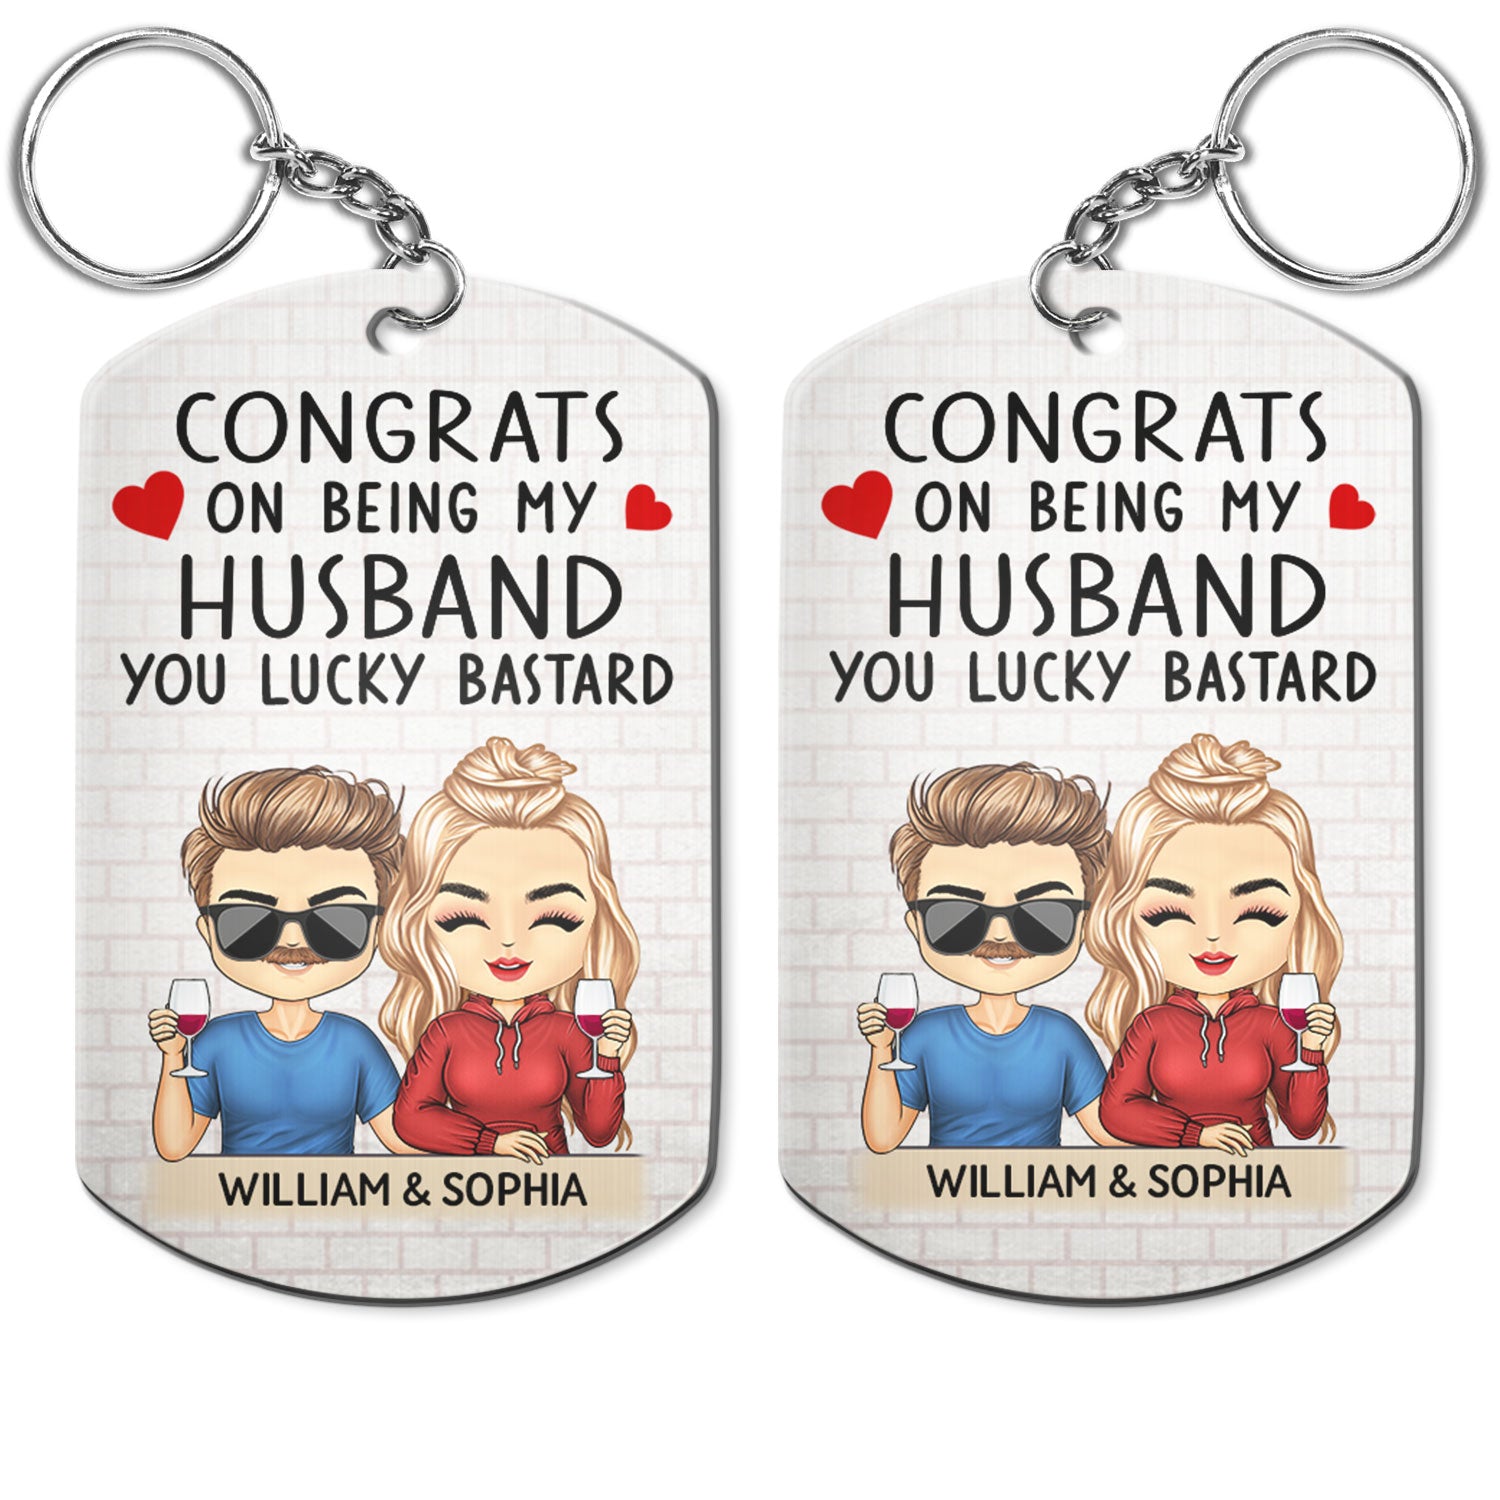 Congrats On Being My Husband Chibi - Anniversary, Vacation, Funny Gift For Couples, Family - Personalized Aluminum Keychain